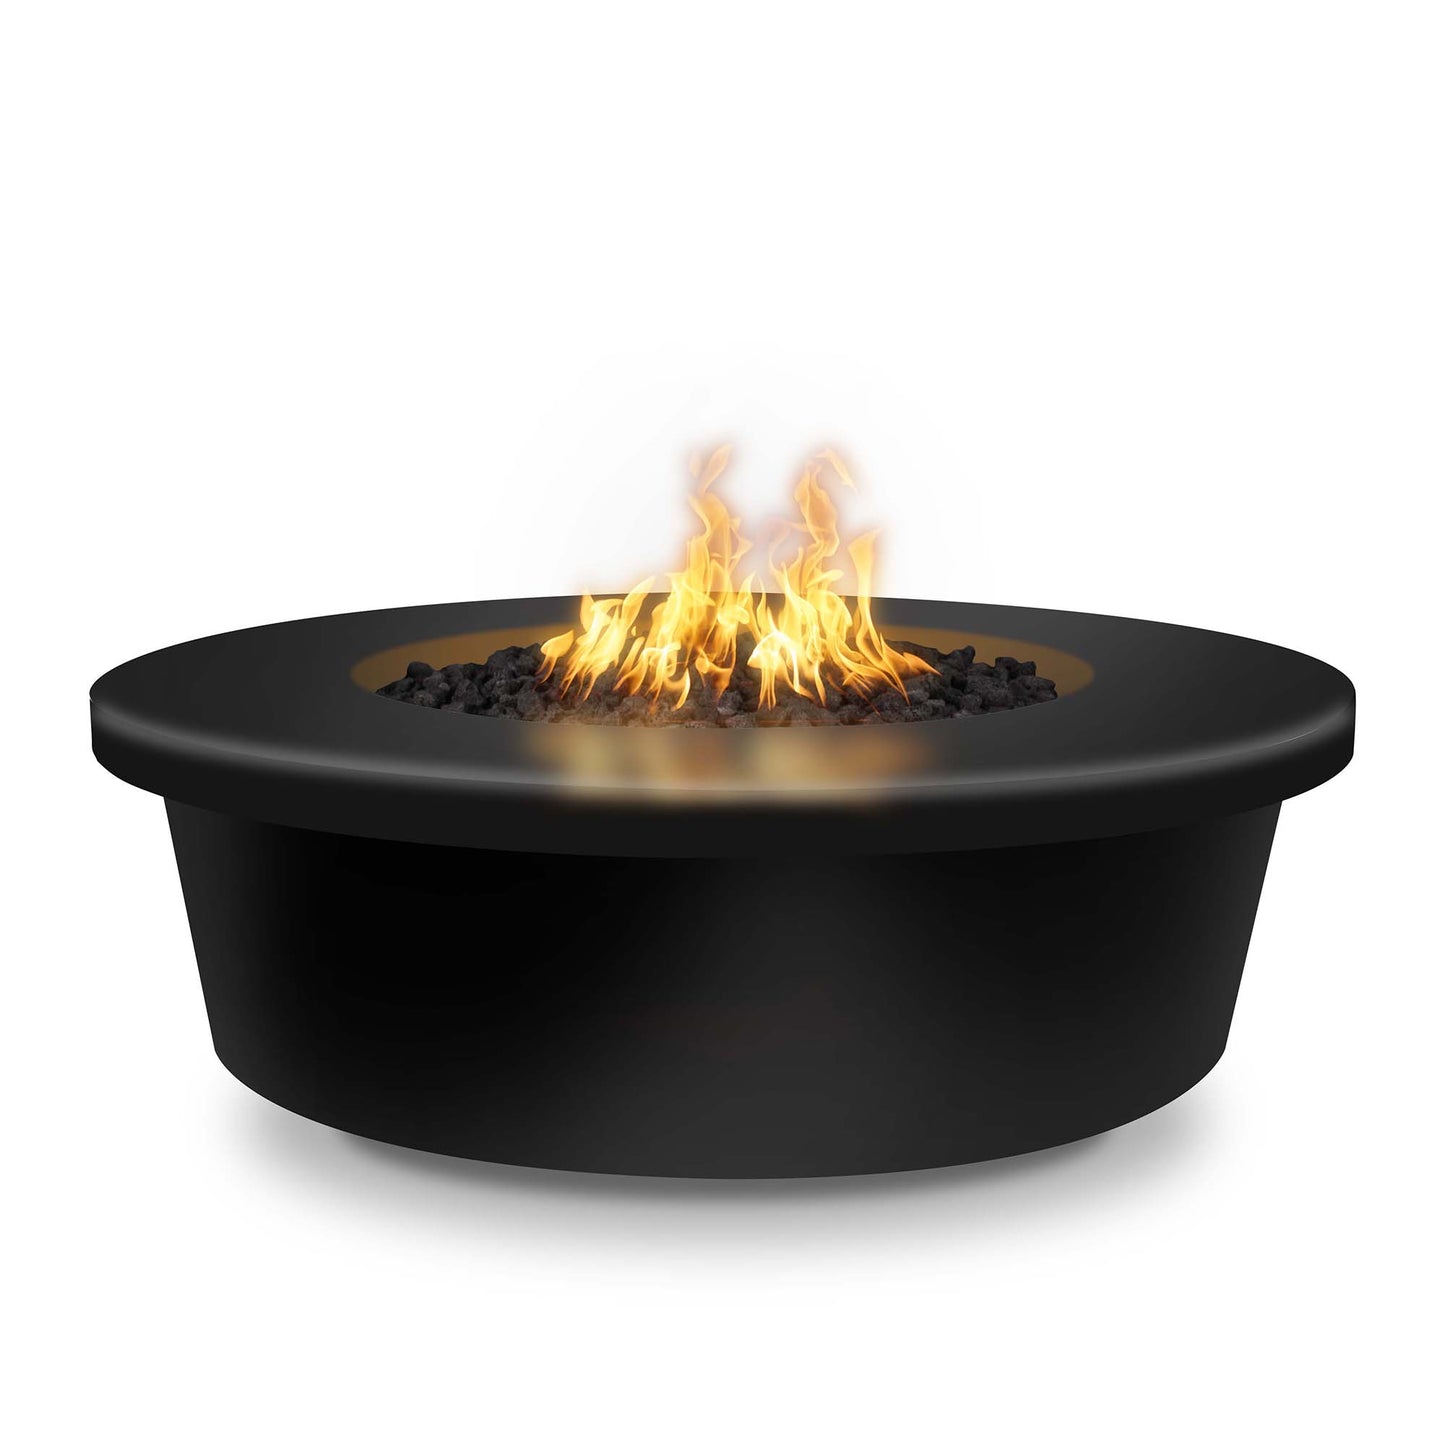 The Outdoor Plus Round Tempe 48" Corten Steel Liquid Propane Fire Pit with Match Lit with Flame Sense Ignition